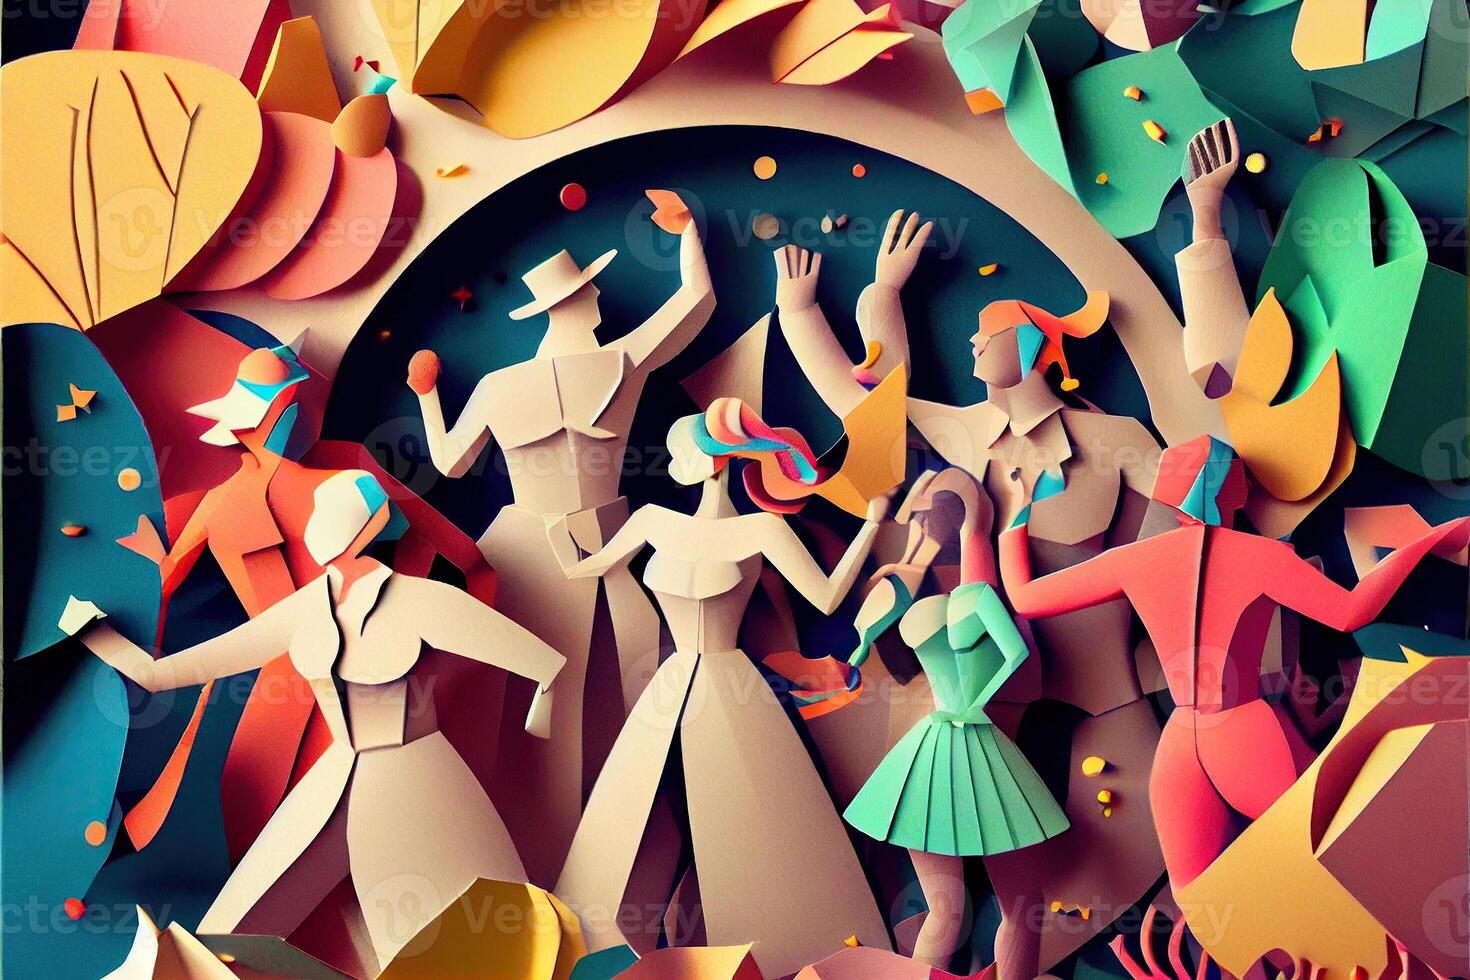 illustration of People in New Year's Eve party background, men and women celebrating holidays together, partying, cheering and dancing. Paper cut craft, 3d paper illustration style. photo